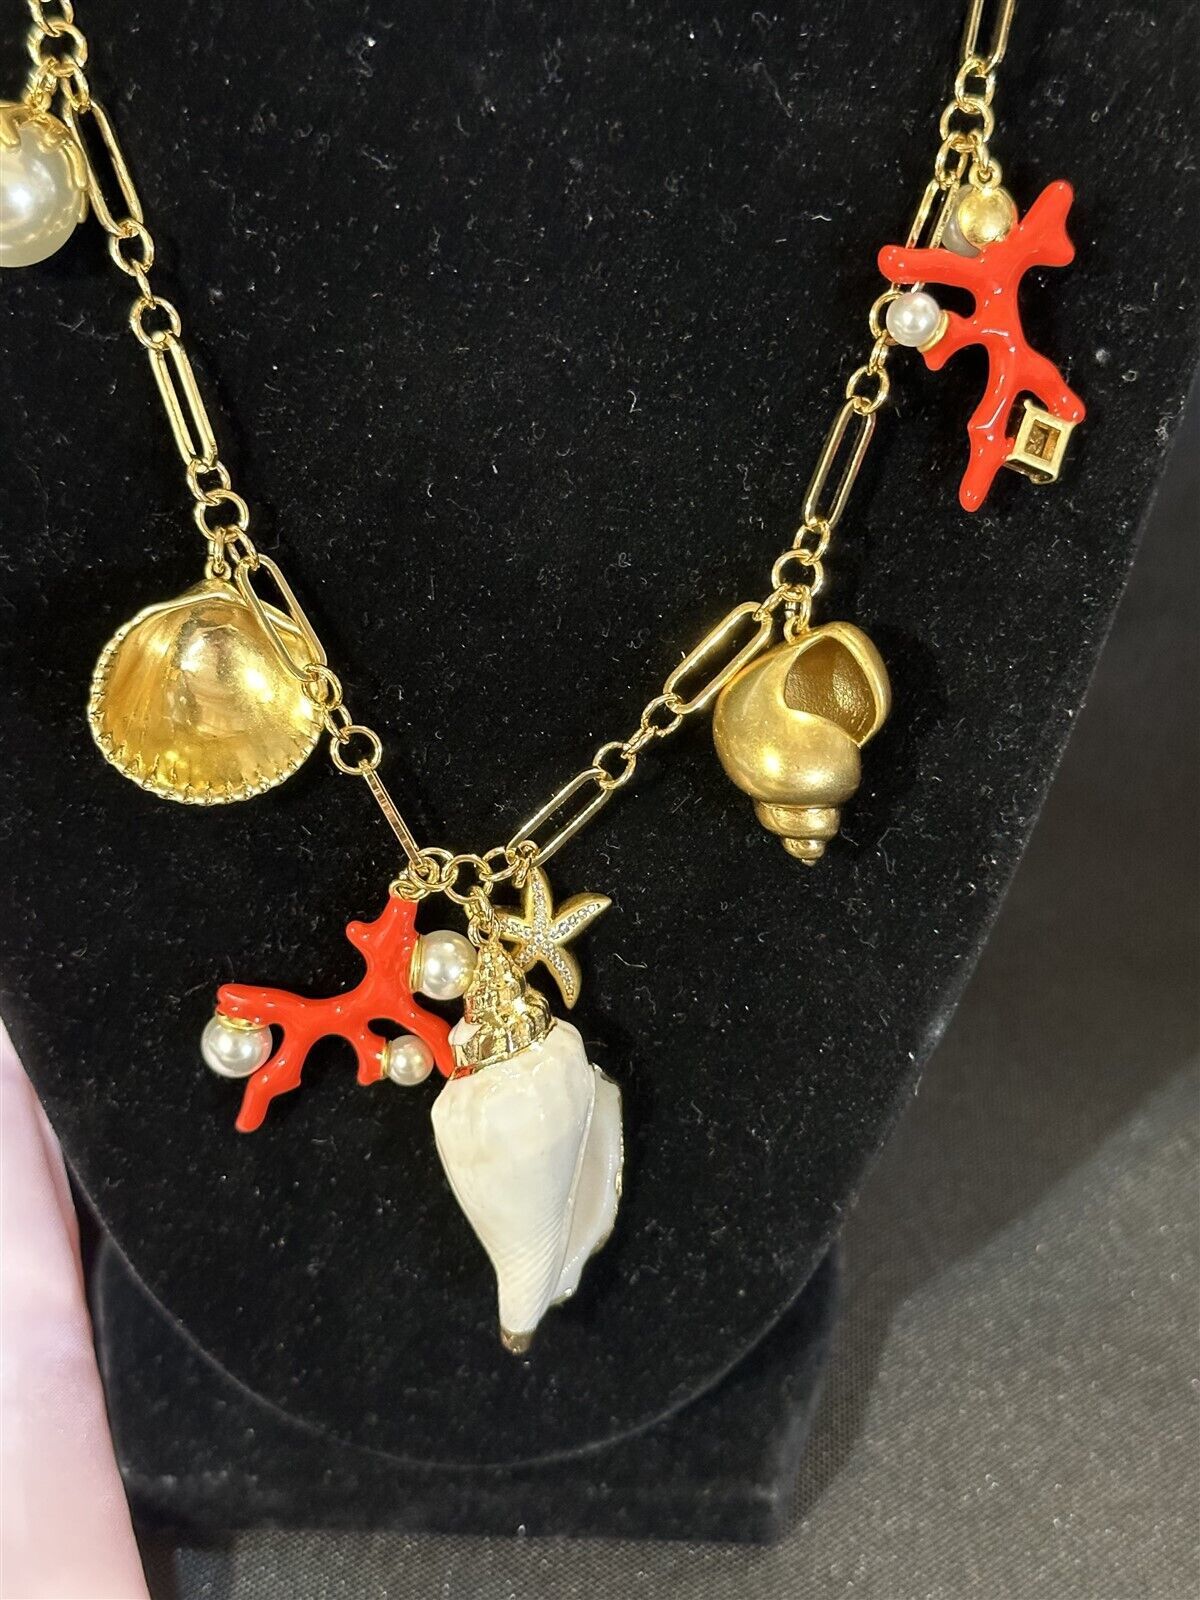 Primary image for BRAND NEW Kate Spade New York Reef Treasure Charm Necklace Coral Shell Conch